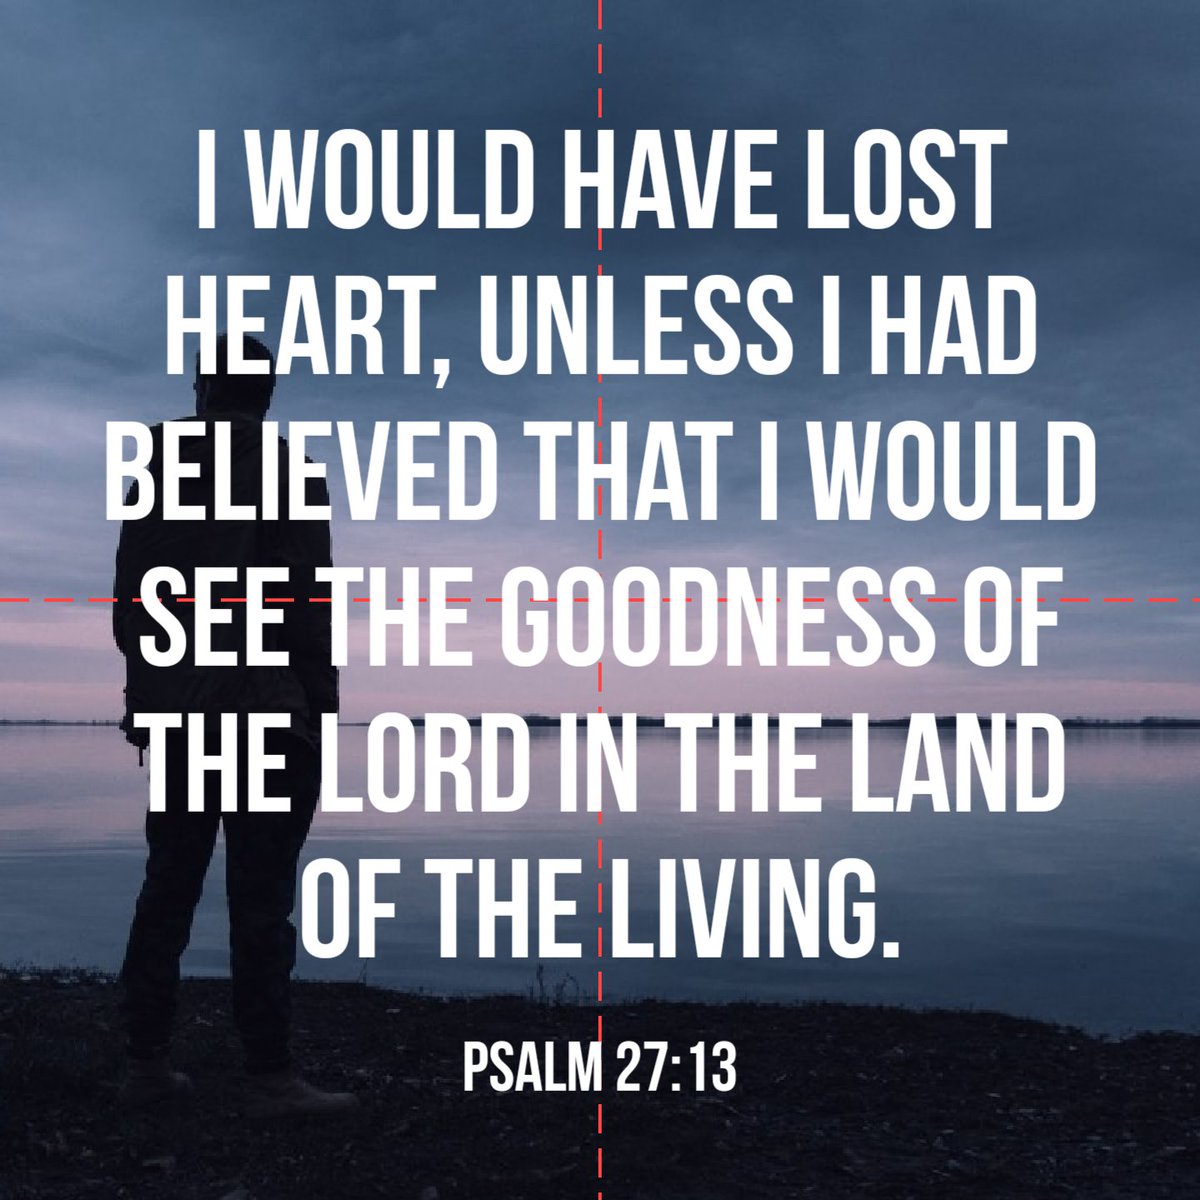 I would have lost heart, unless I had believed That I would see the goodness of the LORD In the land of the living.
Psalm 27:13
#healing #JESUSISOURHEALER